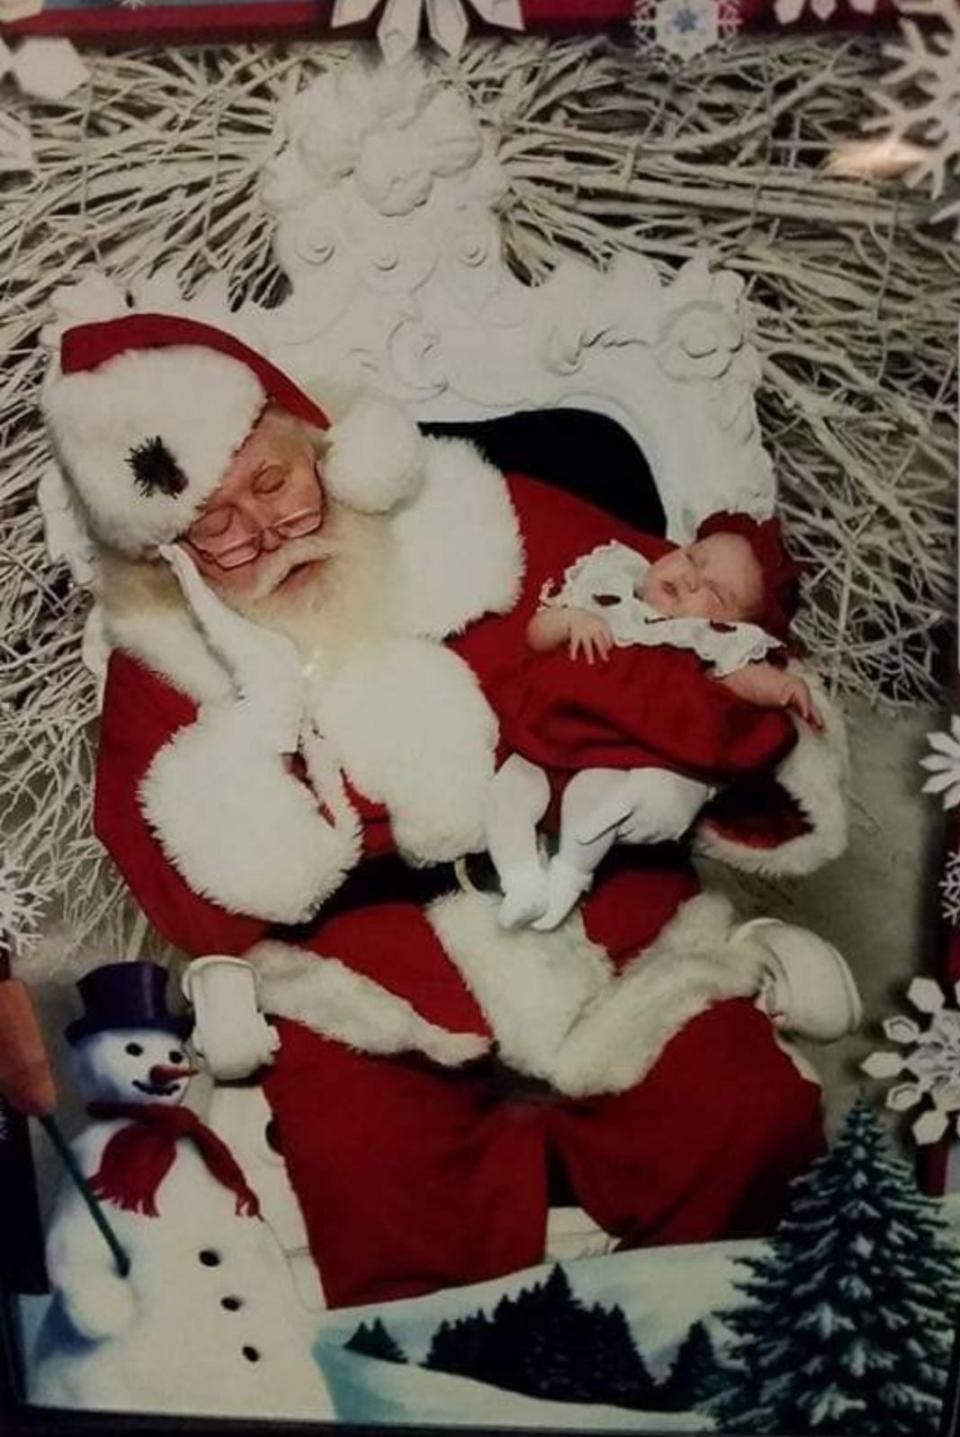 This pic is with the Jefferson Mall Santa. The sleeping baby is our granddaughter Tristen Jo. Tristen is now 17 years old. 